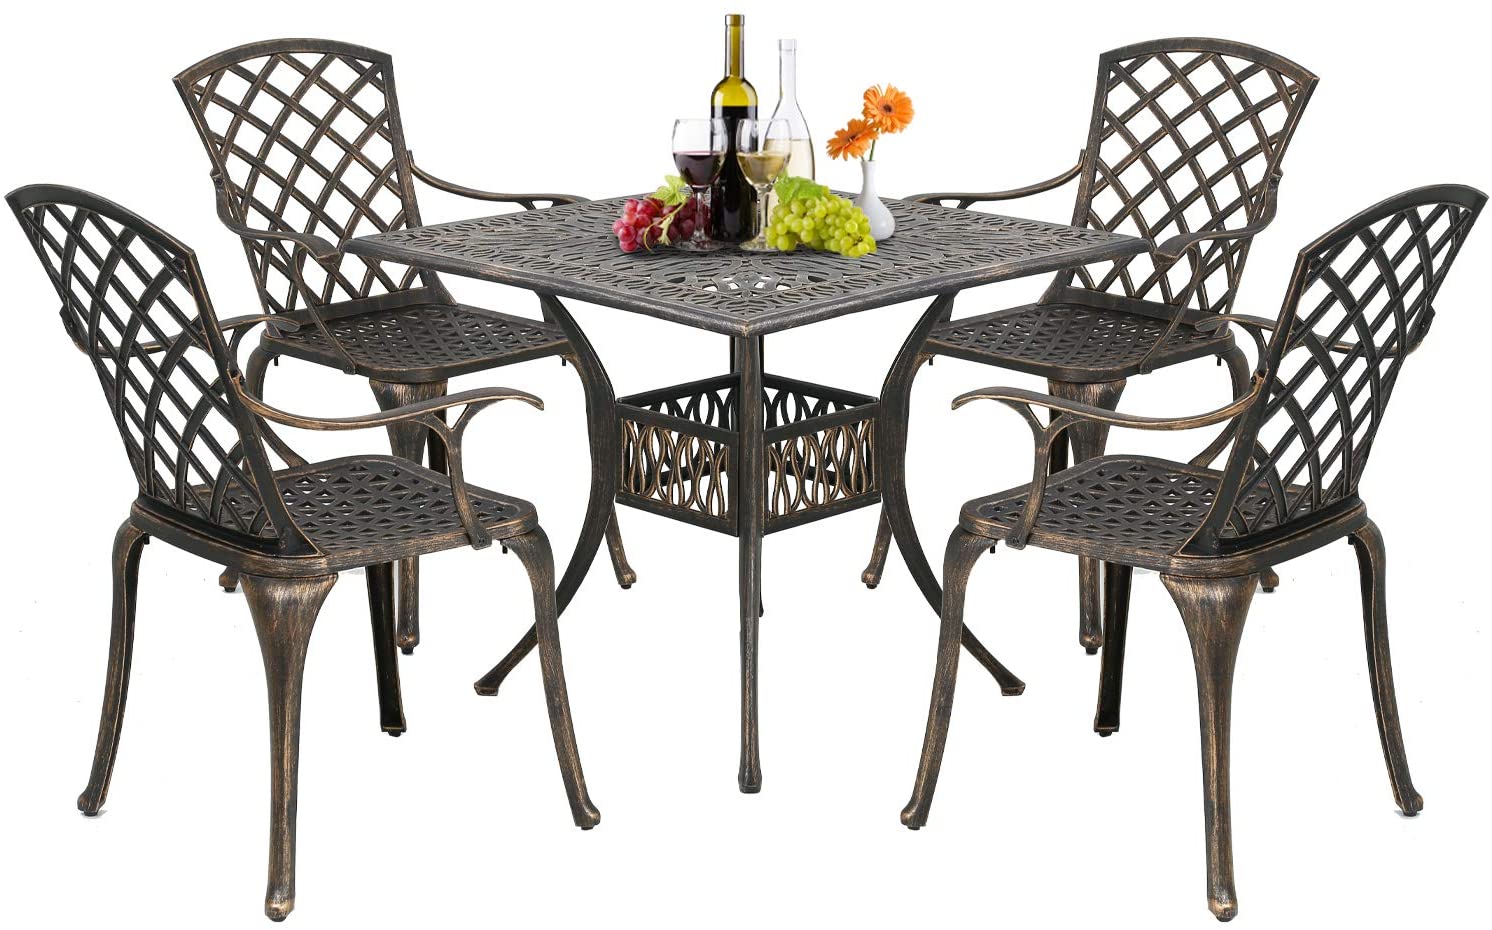 FDW Outdoor Dining Table Set Patio Dining Set Dining Chairs Set of 4 Wrought Iron Patio Furniture Outdoor Dining Set Patio Furniture Patio Chairs Chat Set Weather Resistant - image 1 of 7